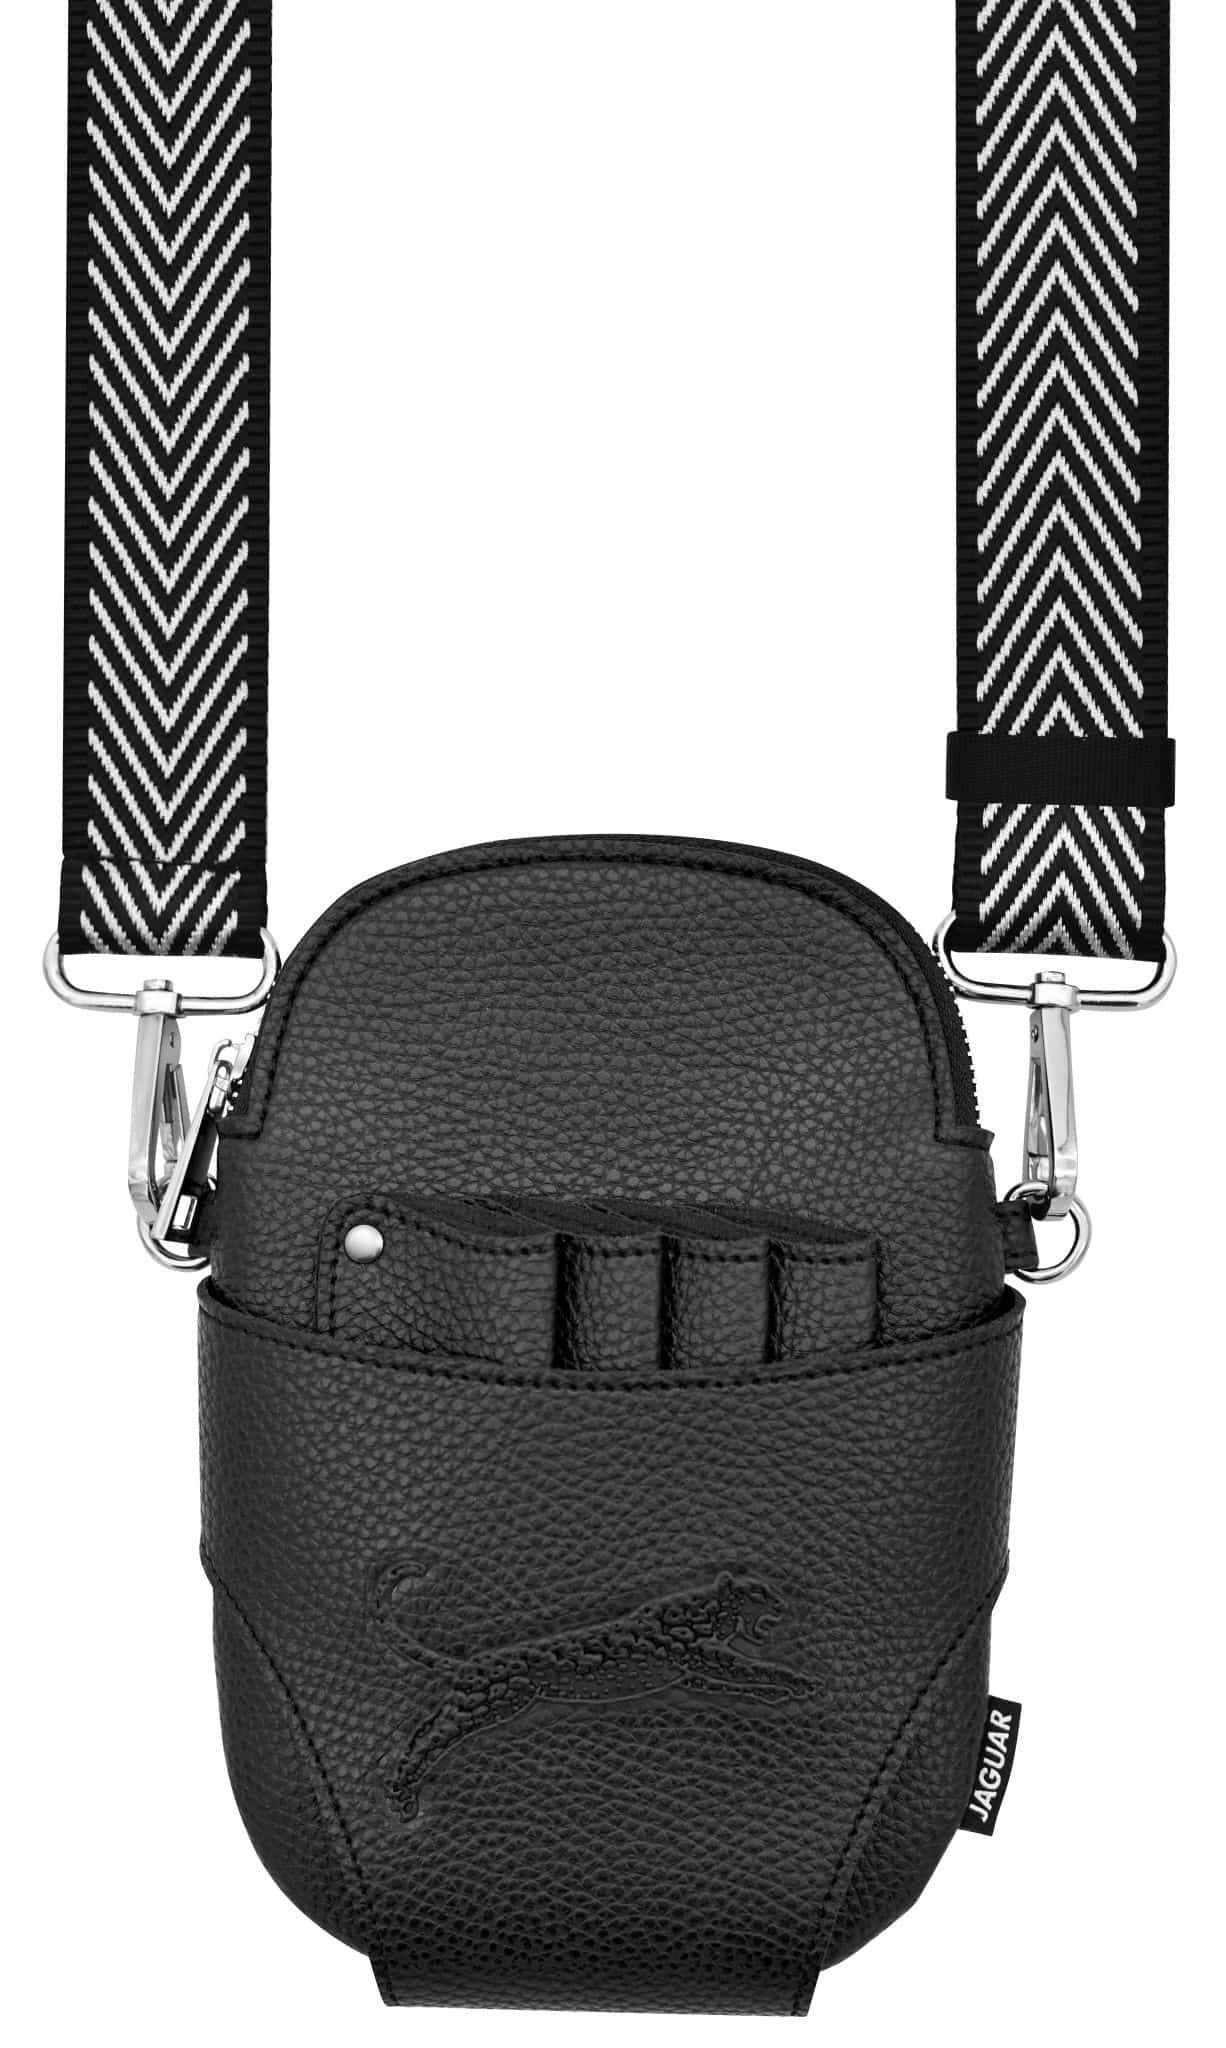 Cross Bag with Multi-straps